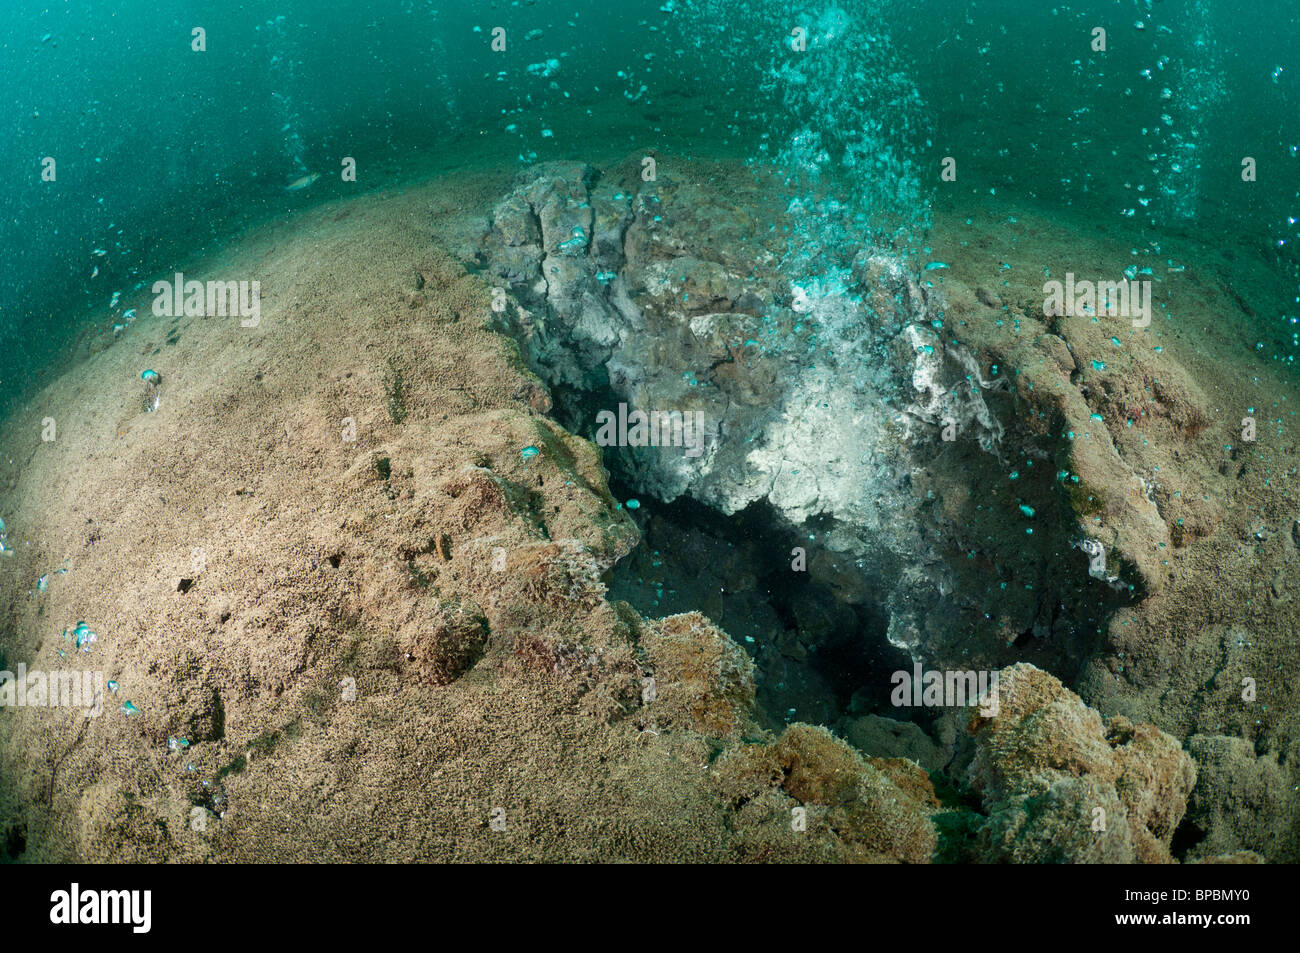 An underwater fumarole releasing bubbles of gas, Pulau Weh, Sumatra, Indonesia. Stock Photo